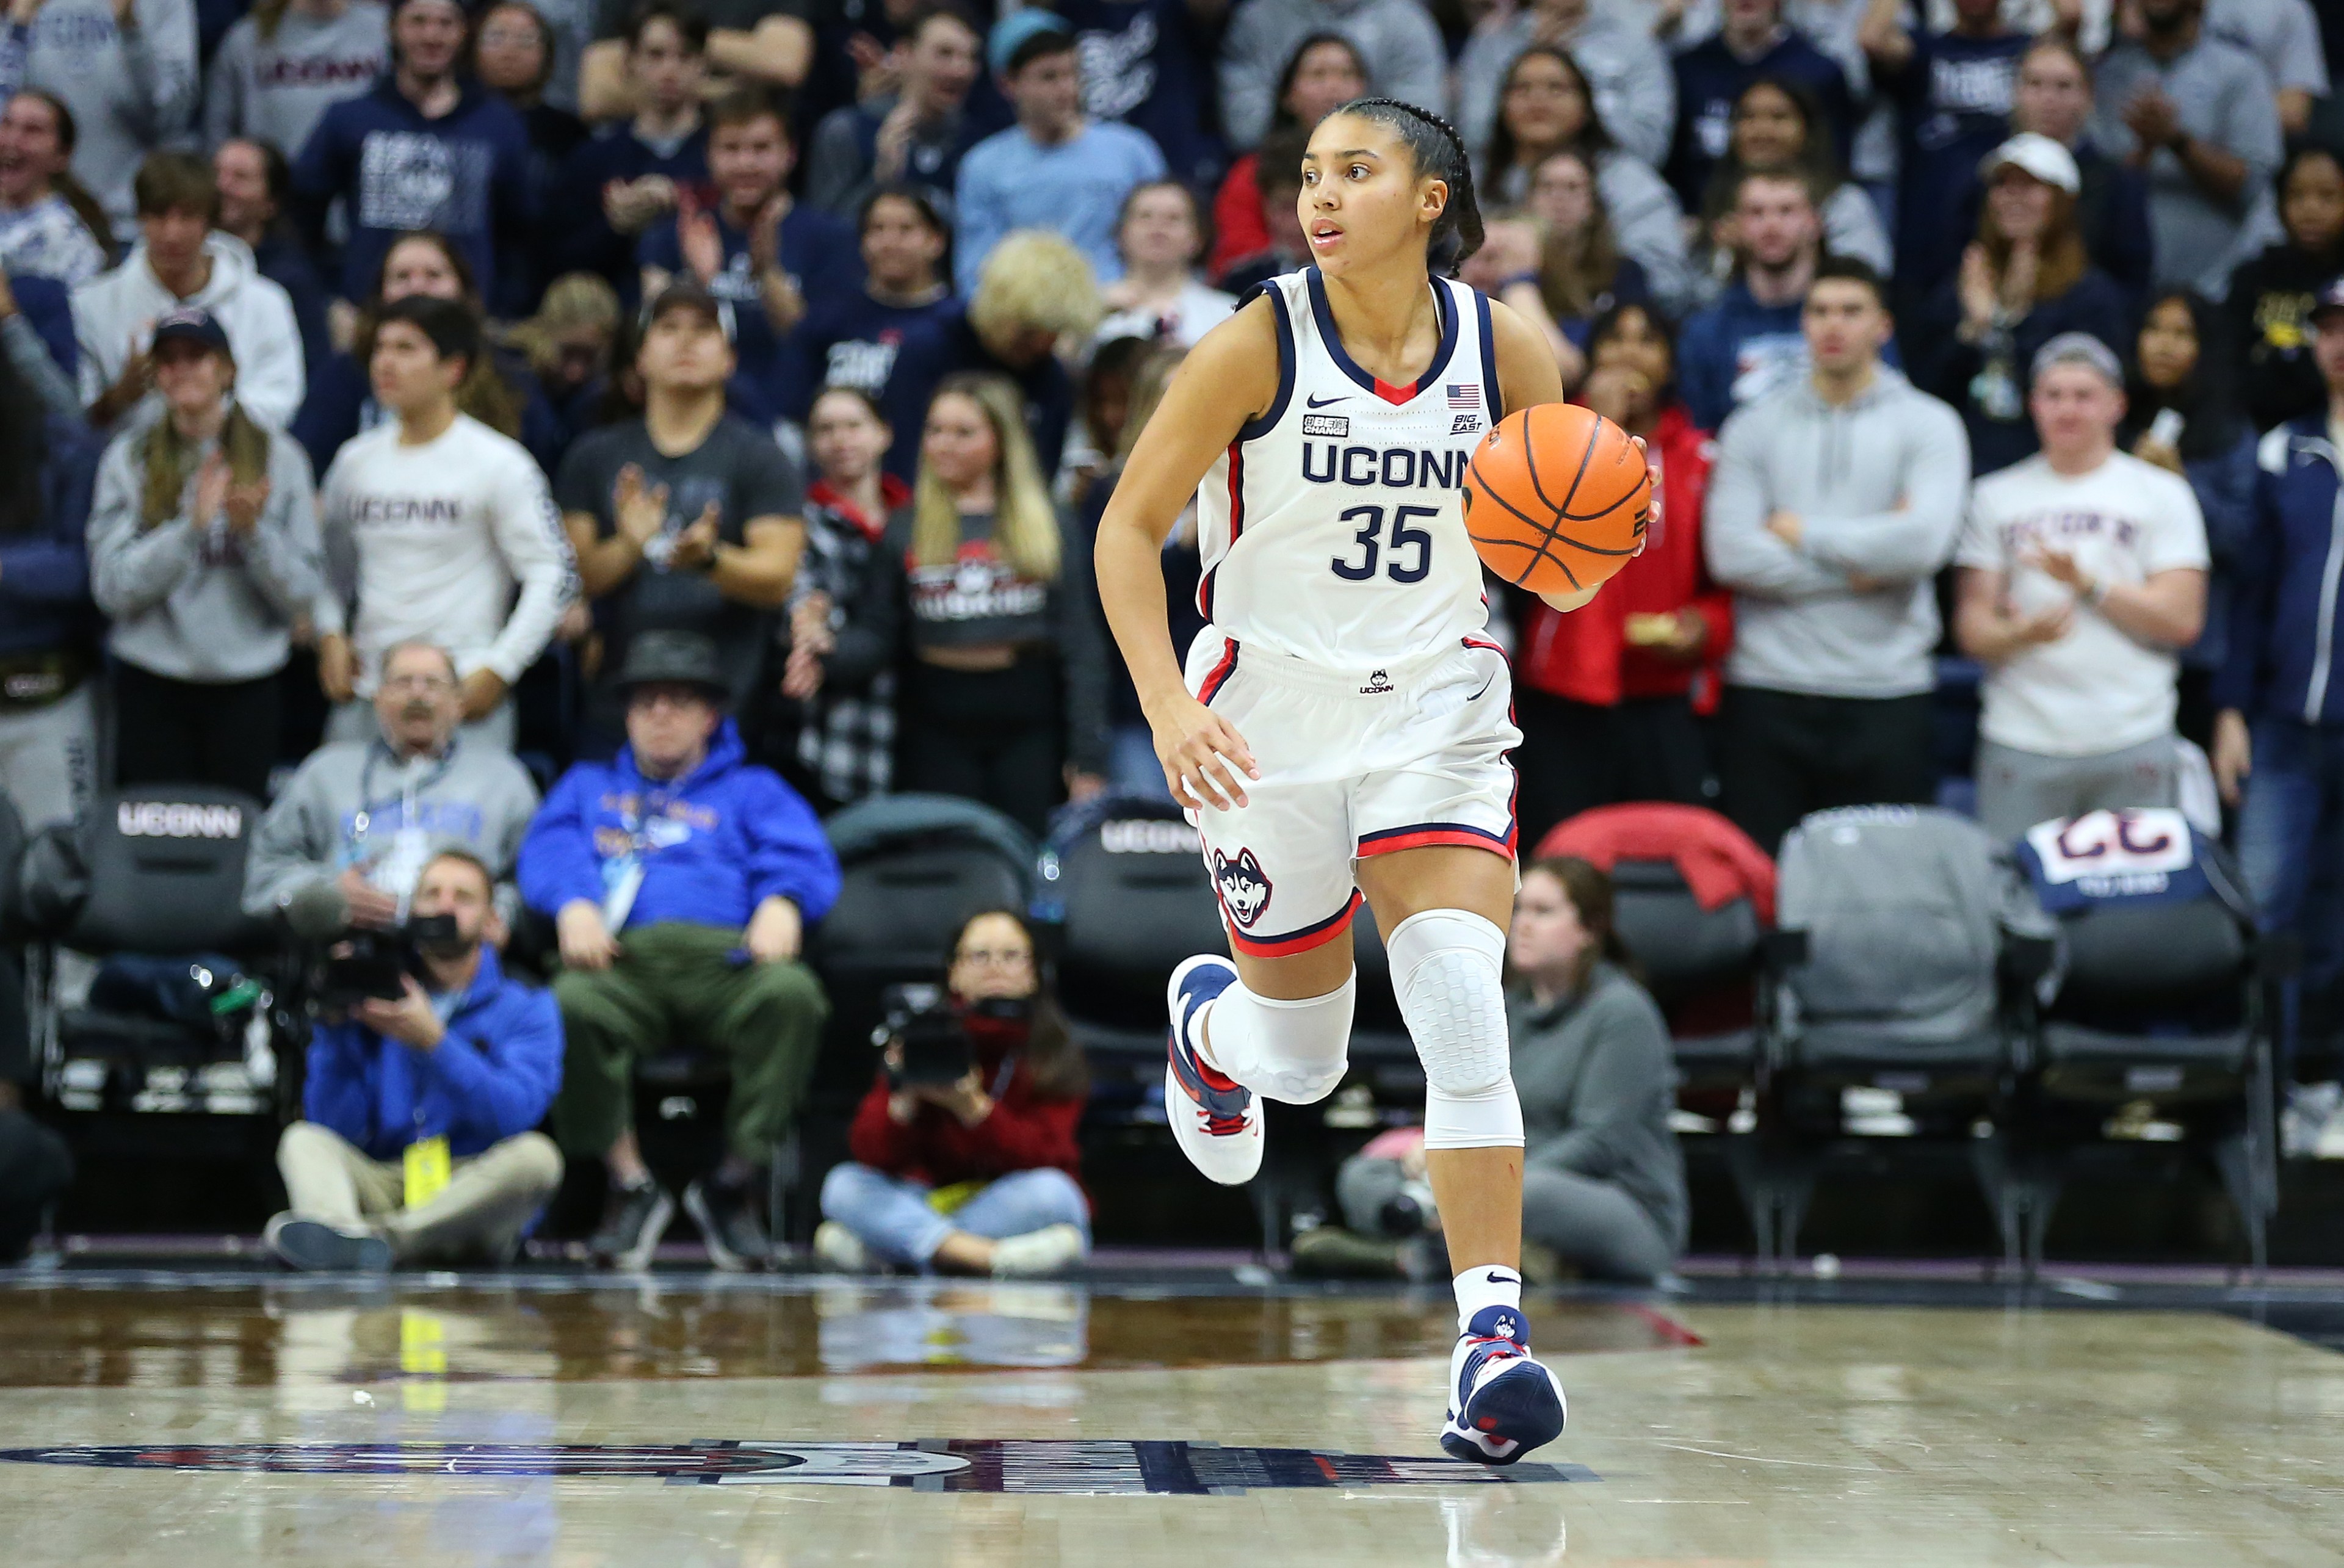 STORRS, CT - NOVEMBER 14: UConn Huskies guard Azzi Fudd (35) in action during a women's college basketball game between Texas Longhorns and UConn Huskies on November 14, 2022, at Harry A. Gampel Pavilion in Storrs, CT.